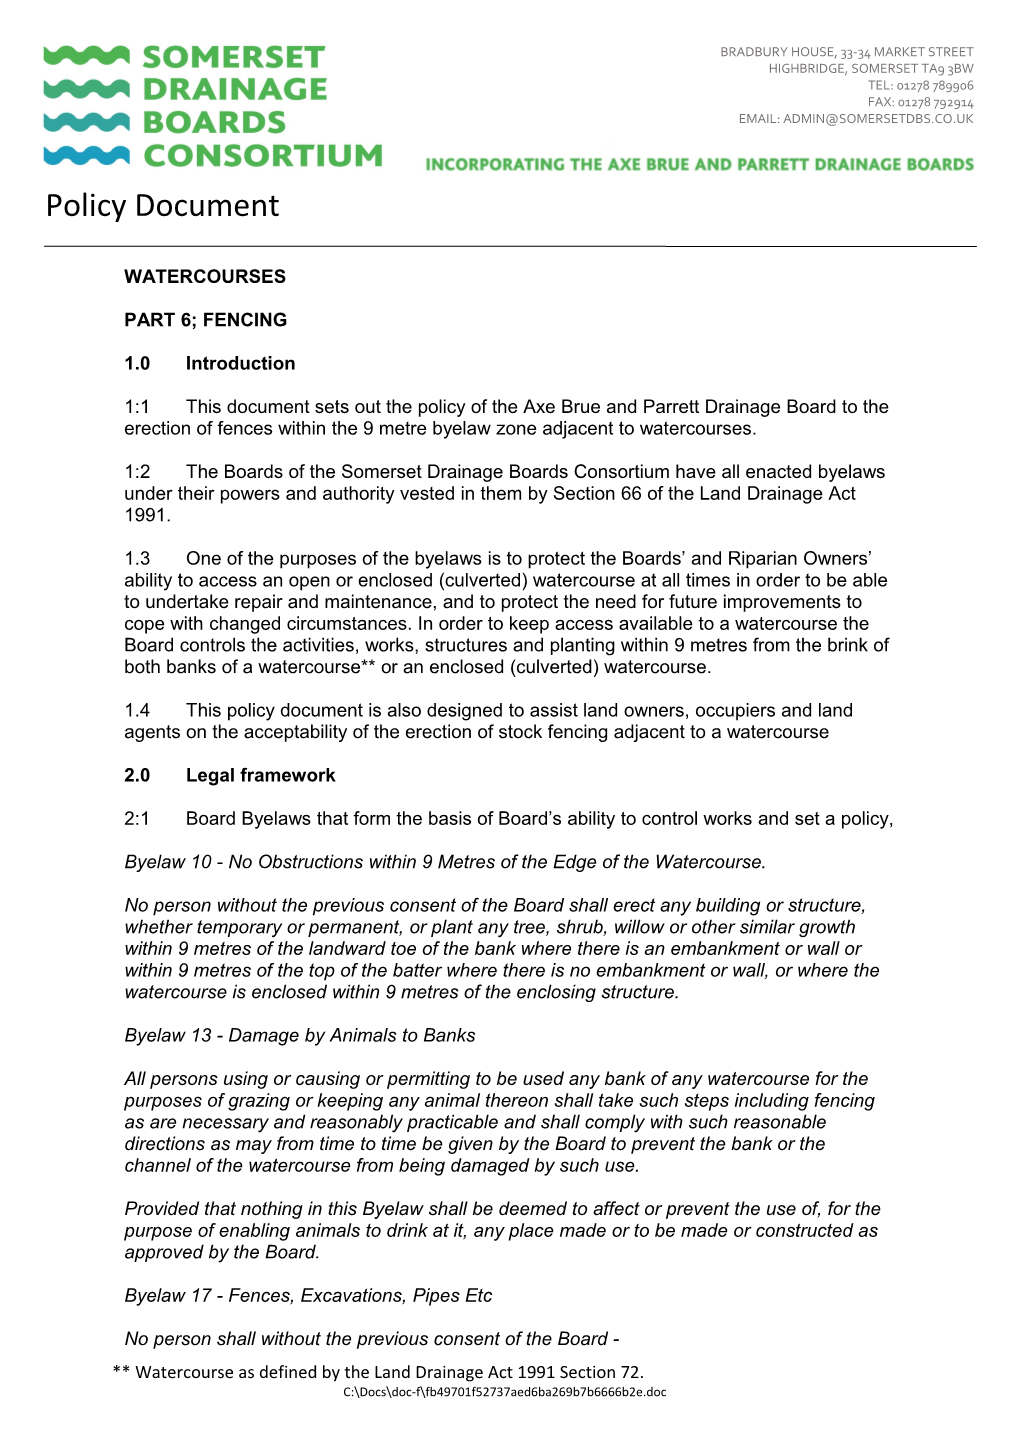 1:1This Document Sets out the Policy of the Axe Brue and Parrett Drainage Board to The